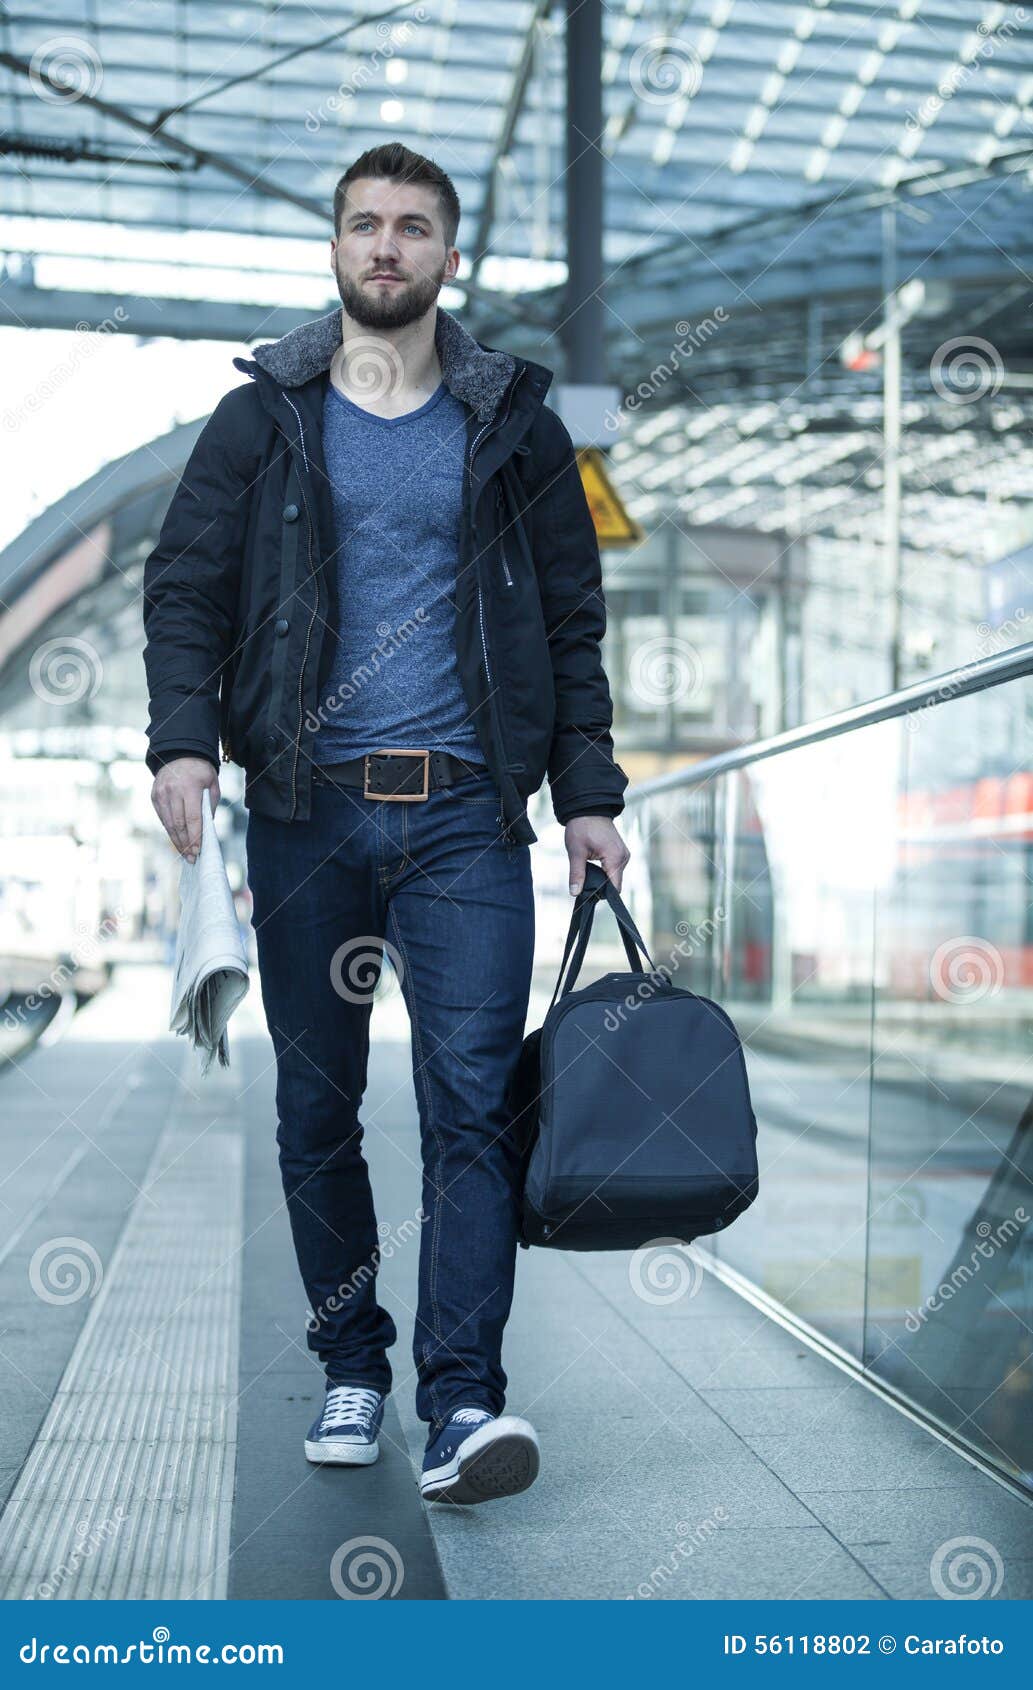 man with travel bag